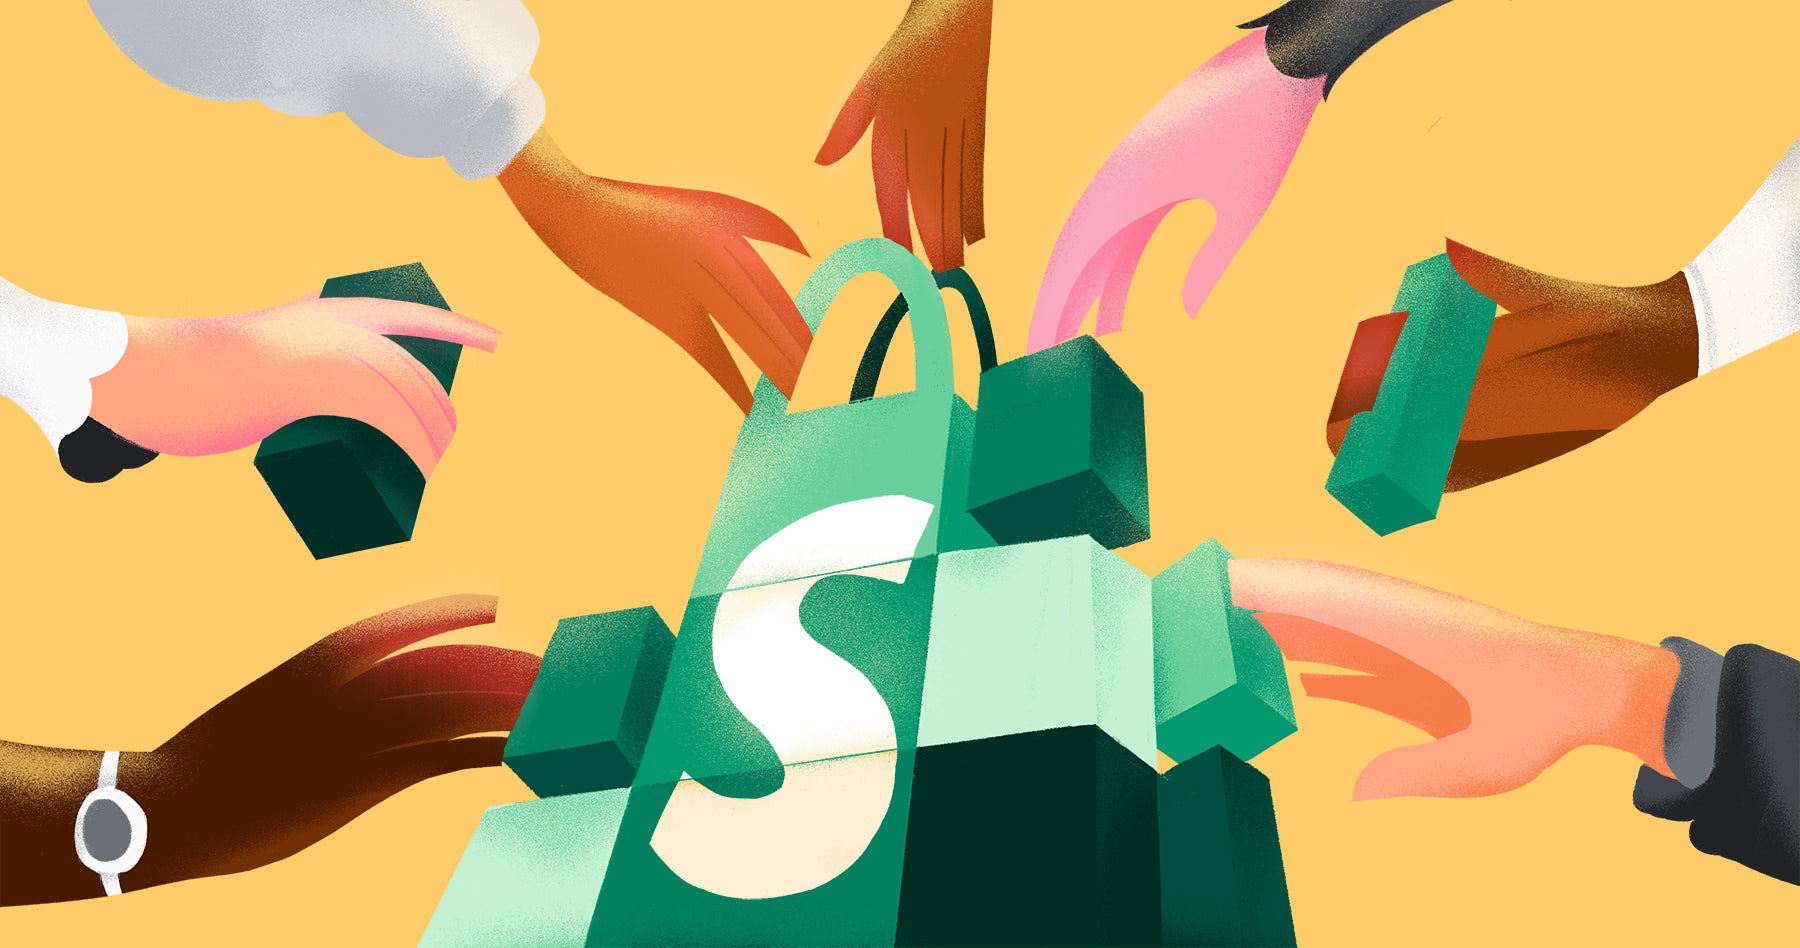 Illustrated hands building the Shopify logo to represent the earliest merchants on the platform 